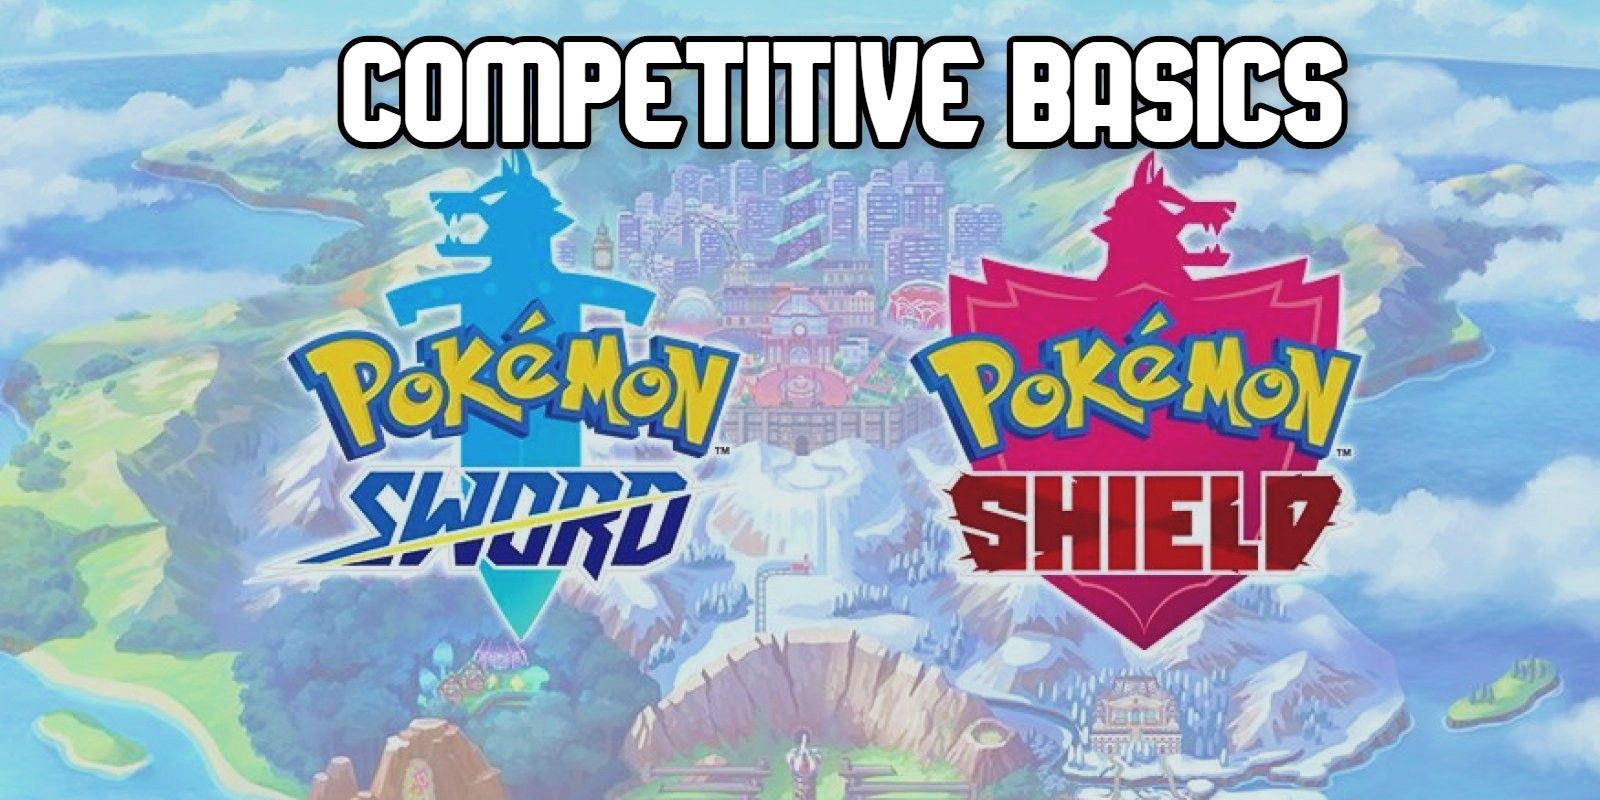 Pokemon Sword and Shield Competitive Guide